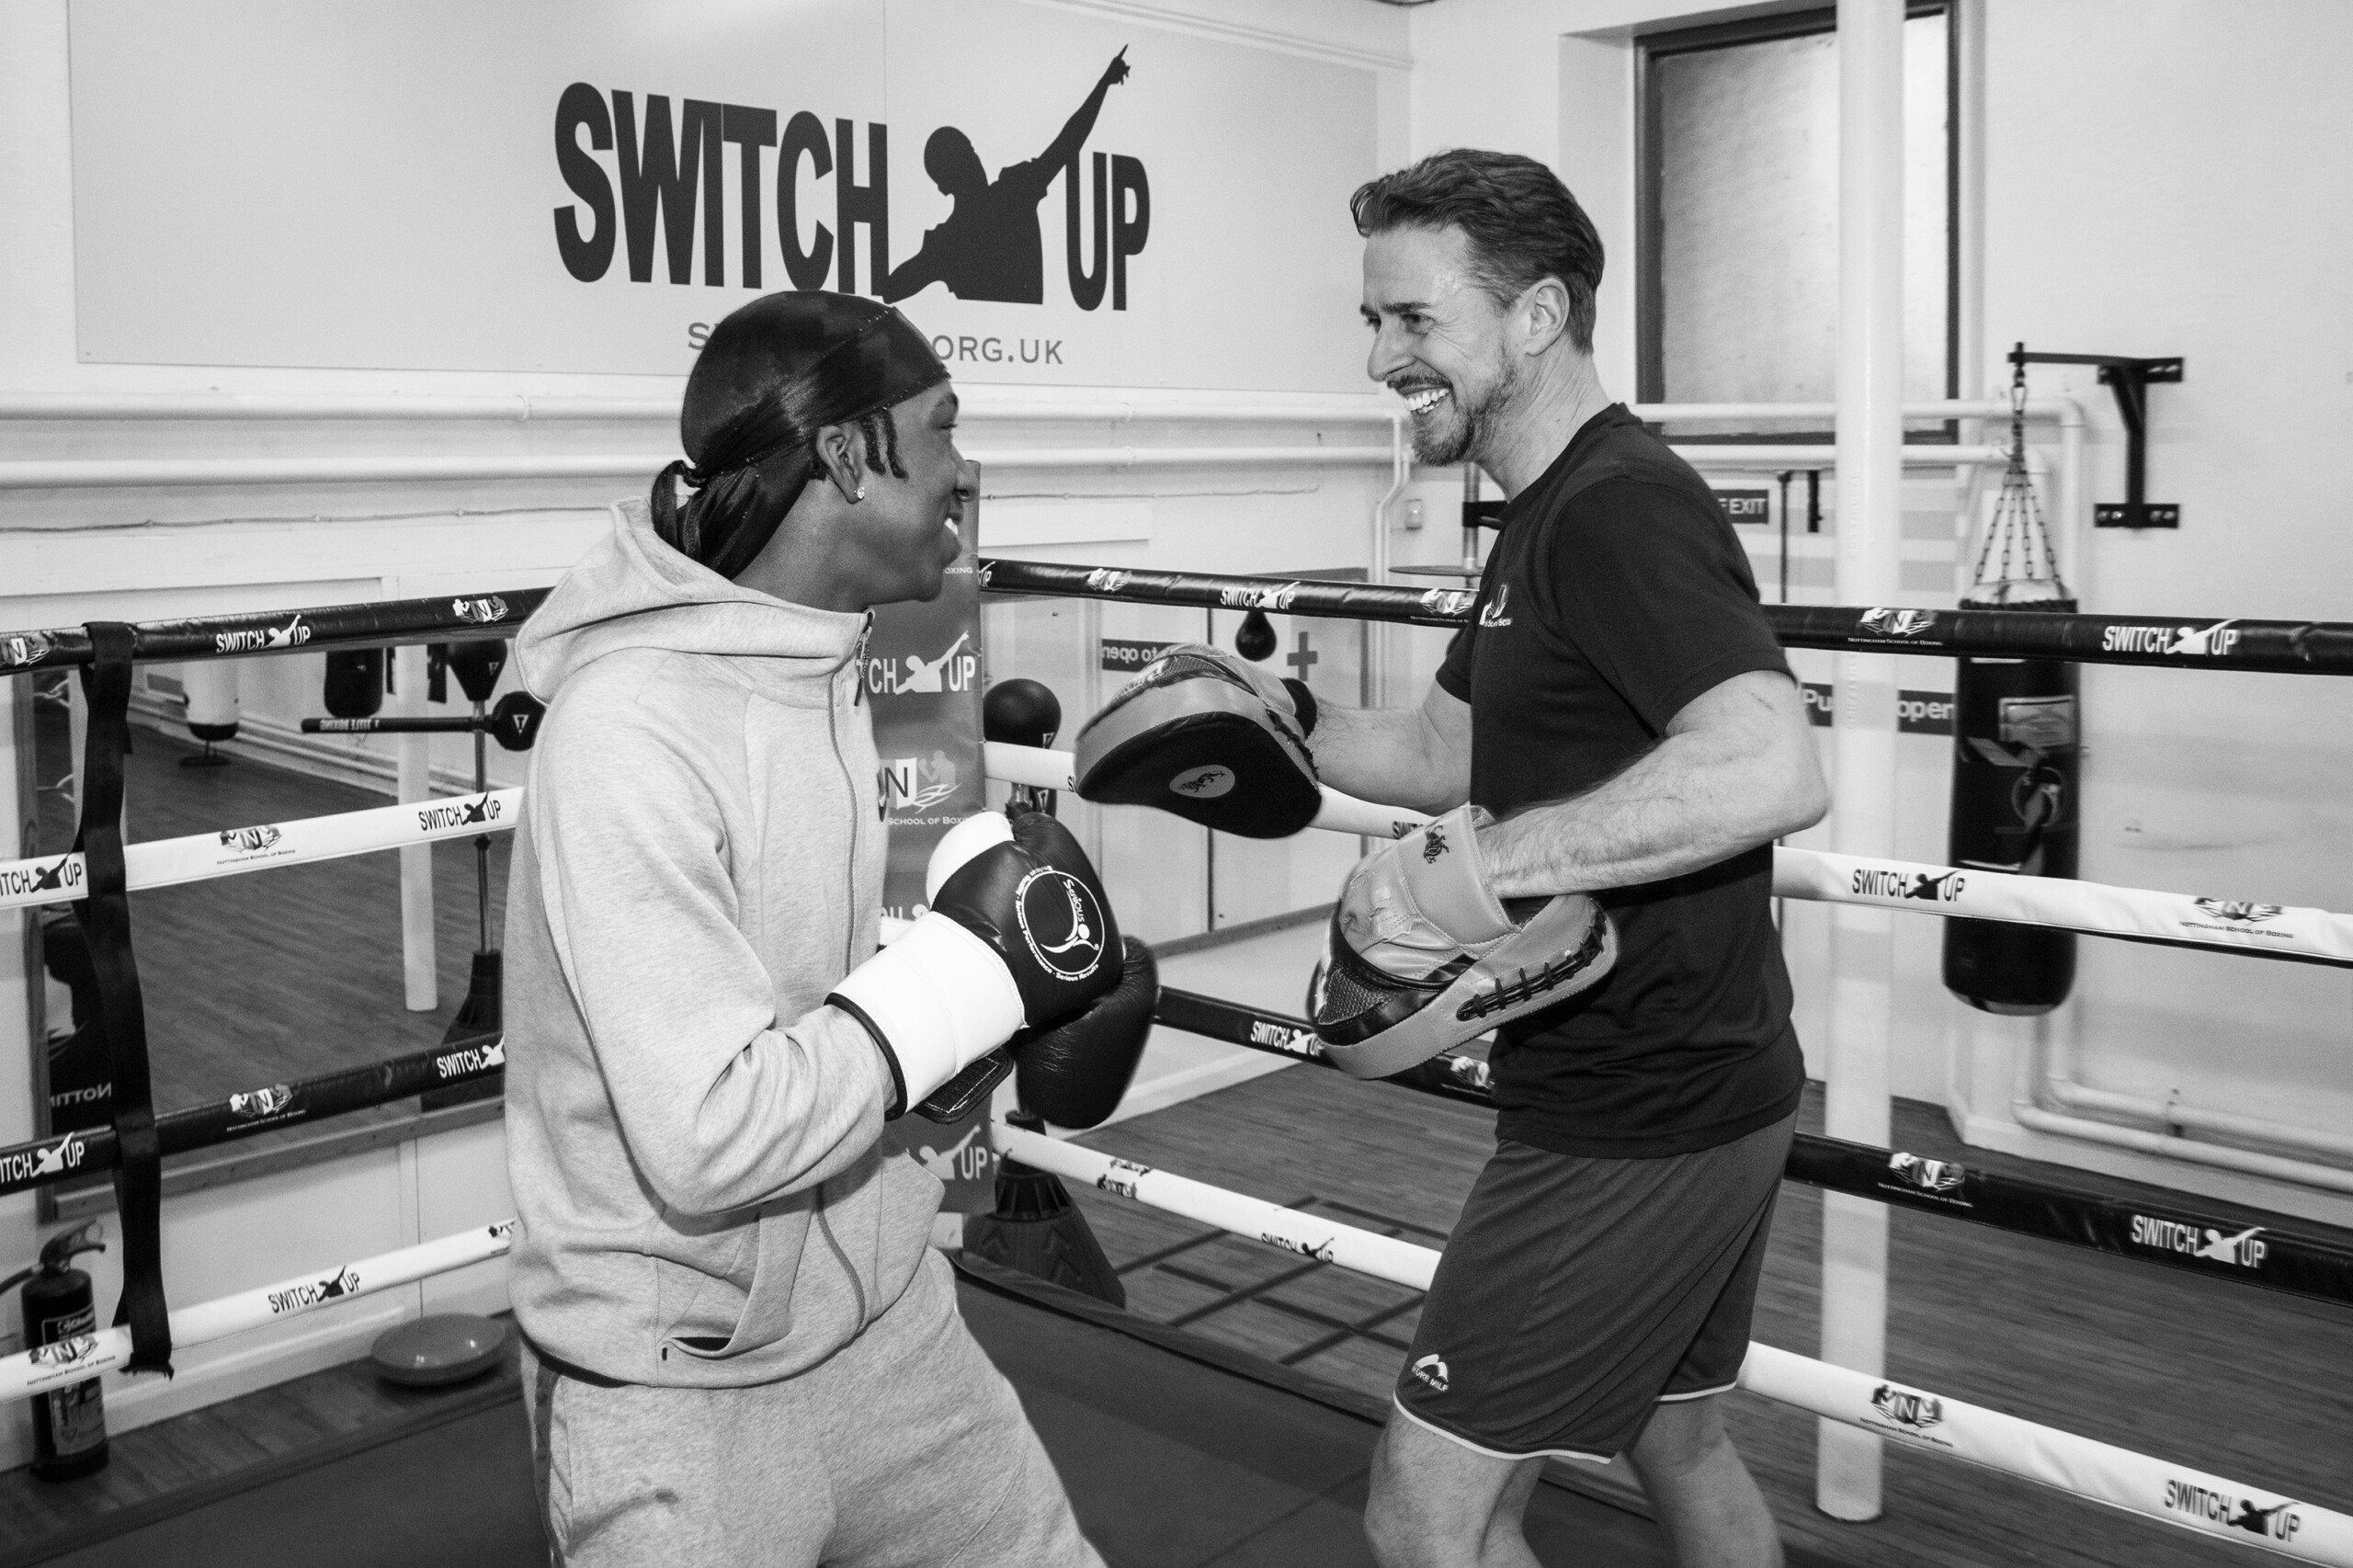 Randy in the ring with Ash for a boxing training session at Switch Up, Nottingham School of Boxing, Nottingham, United Kingdom. (photo by Andy Aitchison)